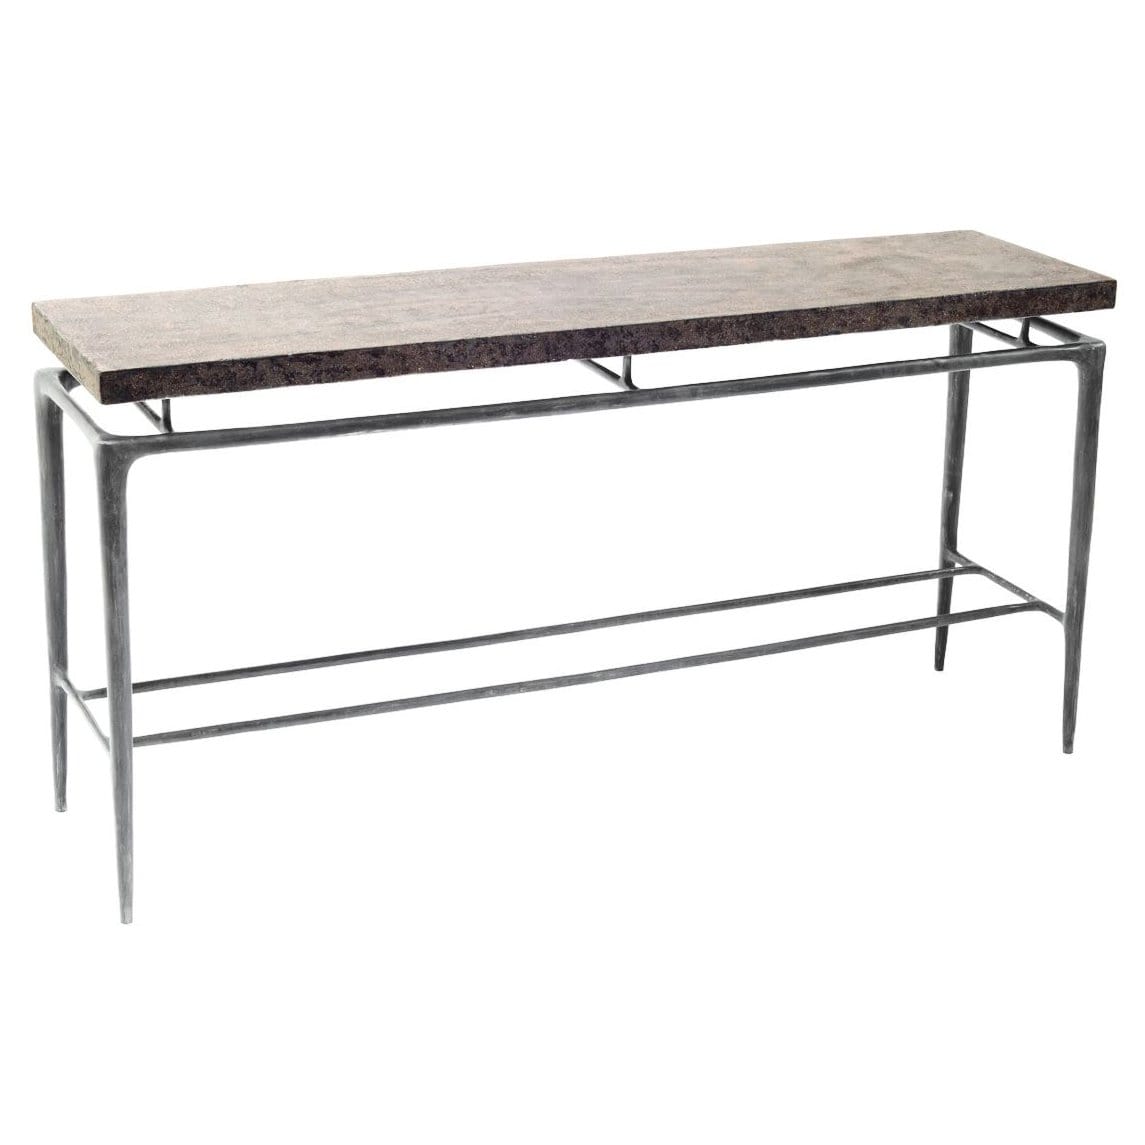 Oly Studio Ray Console Furniture Oly-RayConsole